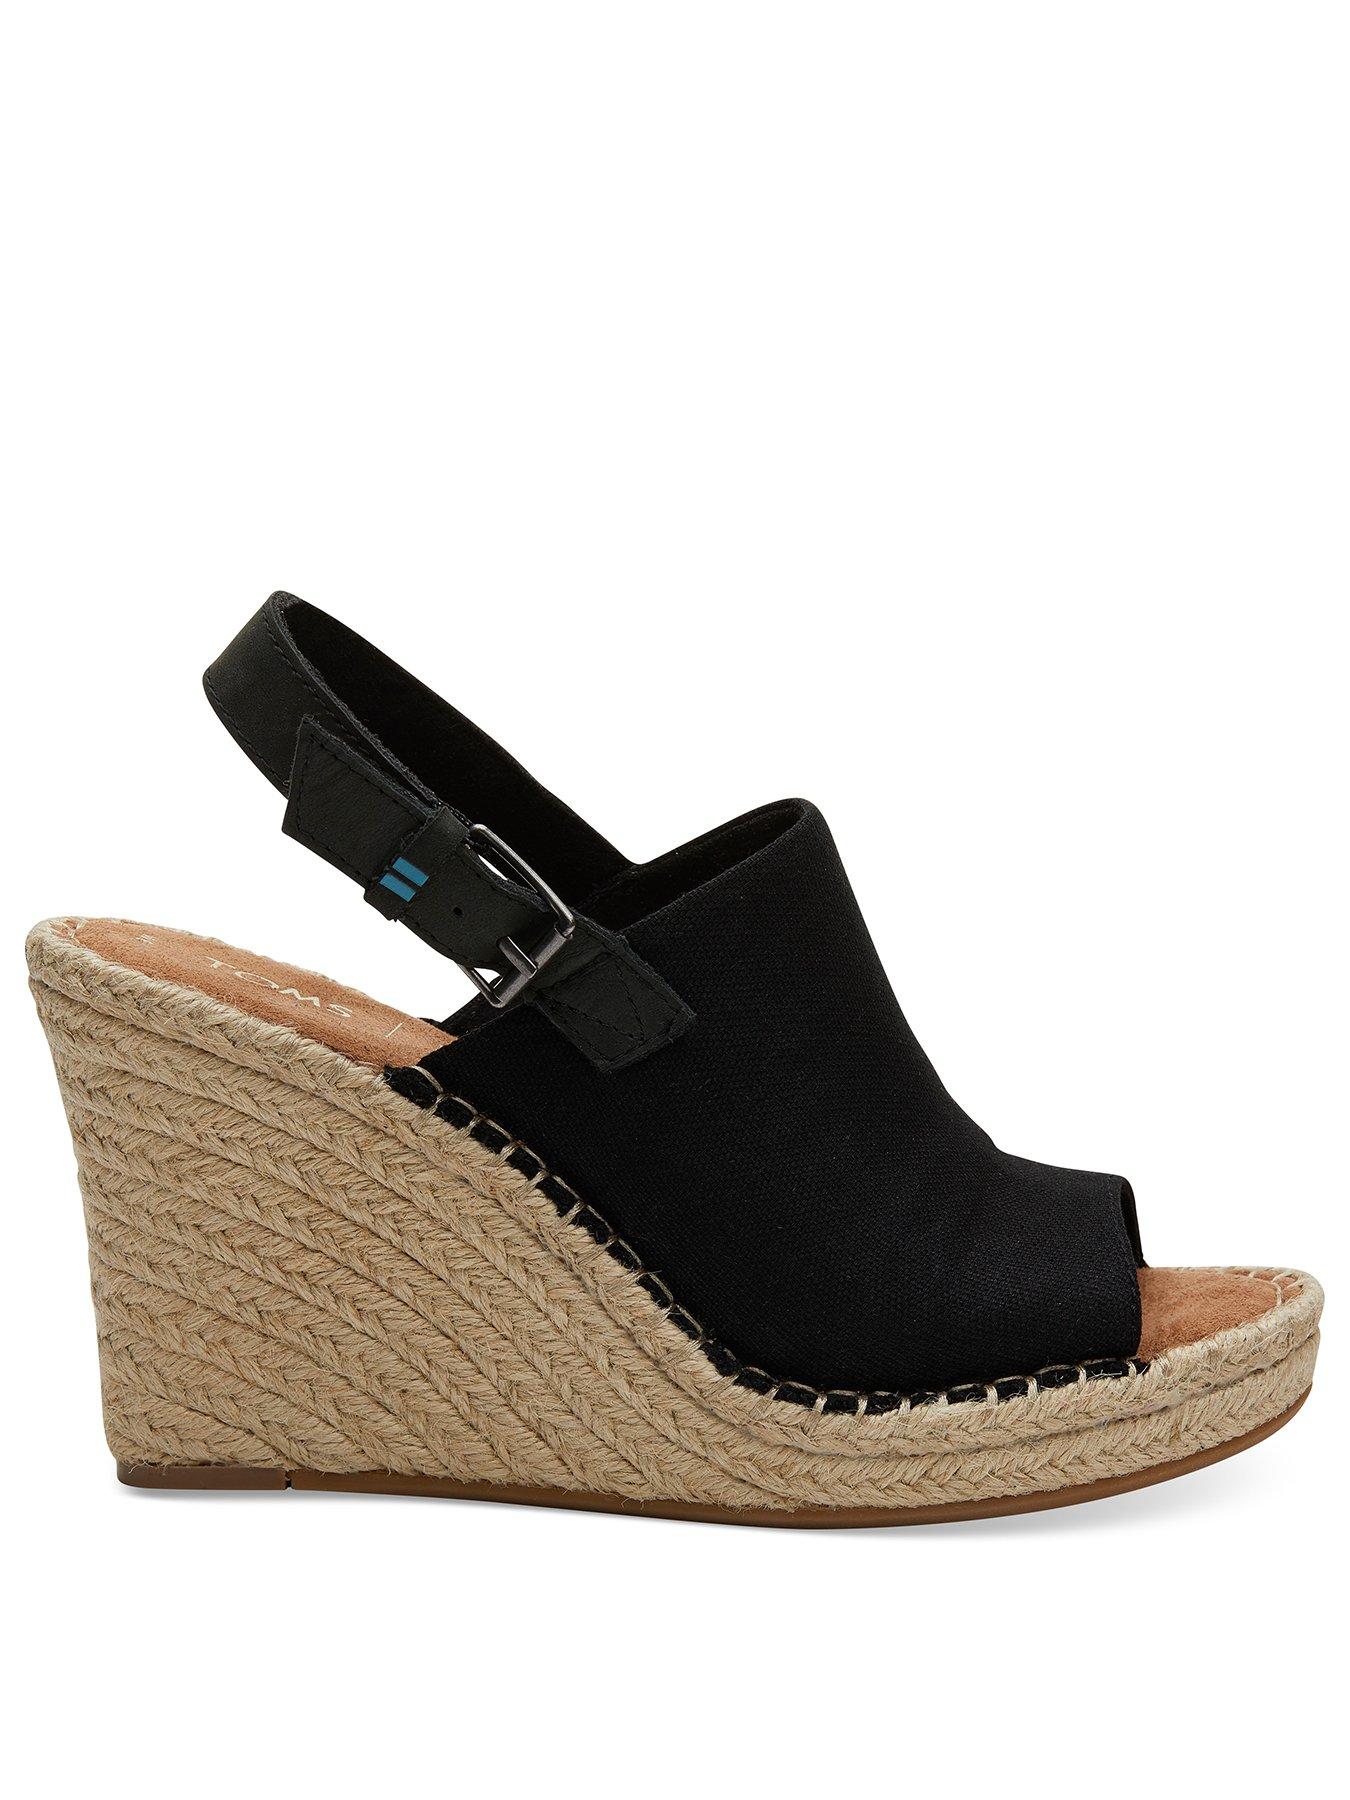 toms nude wedges